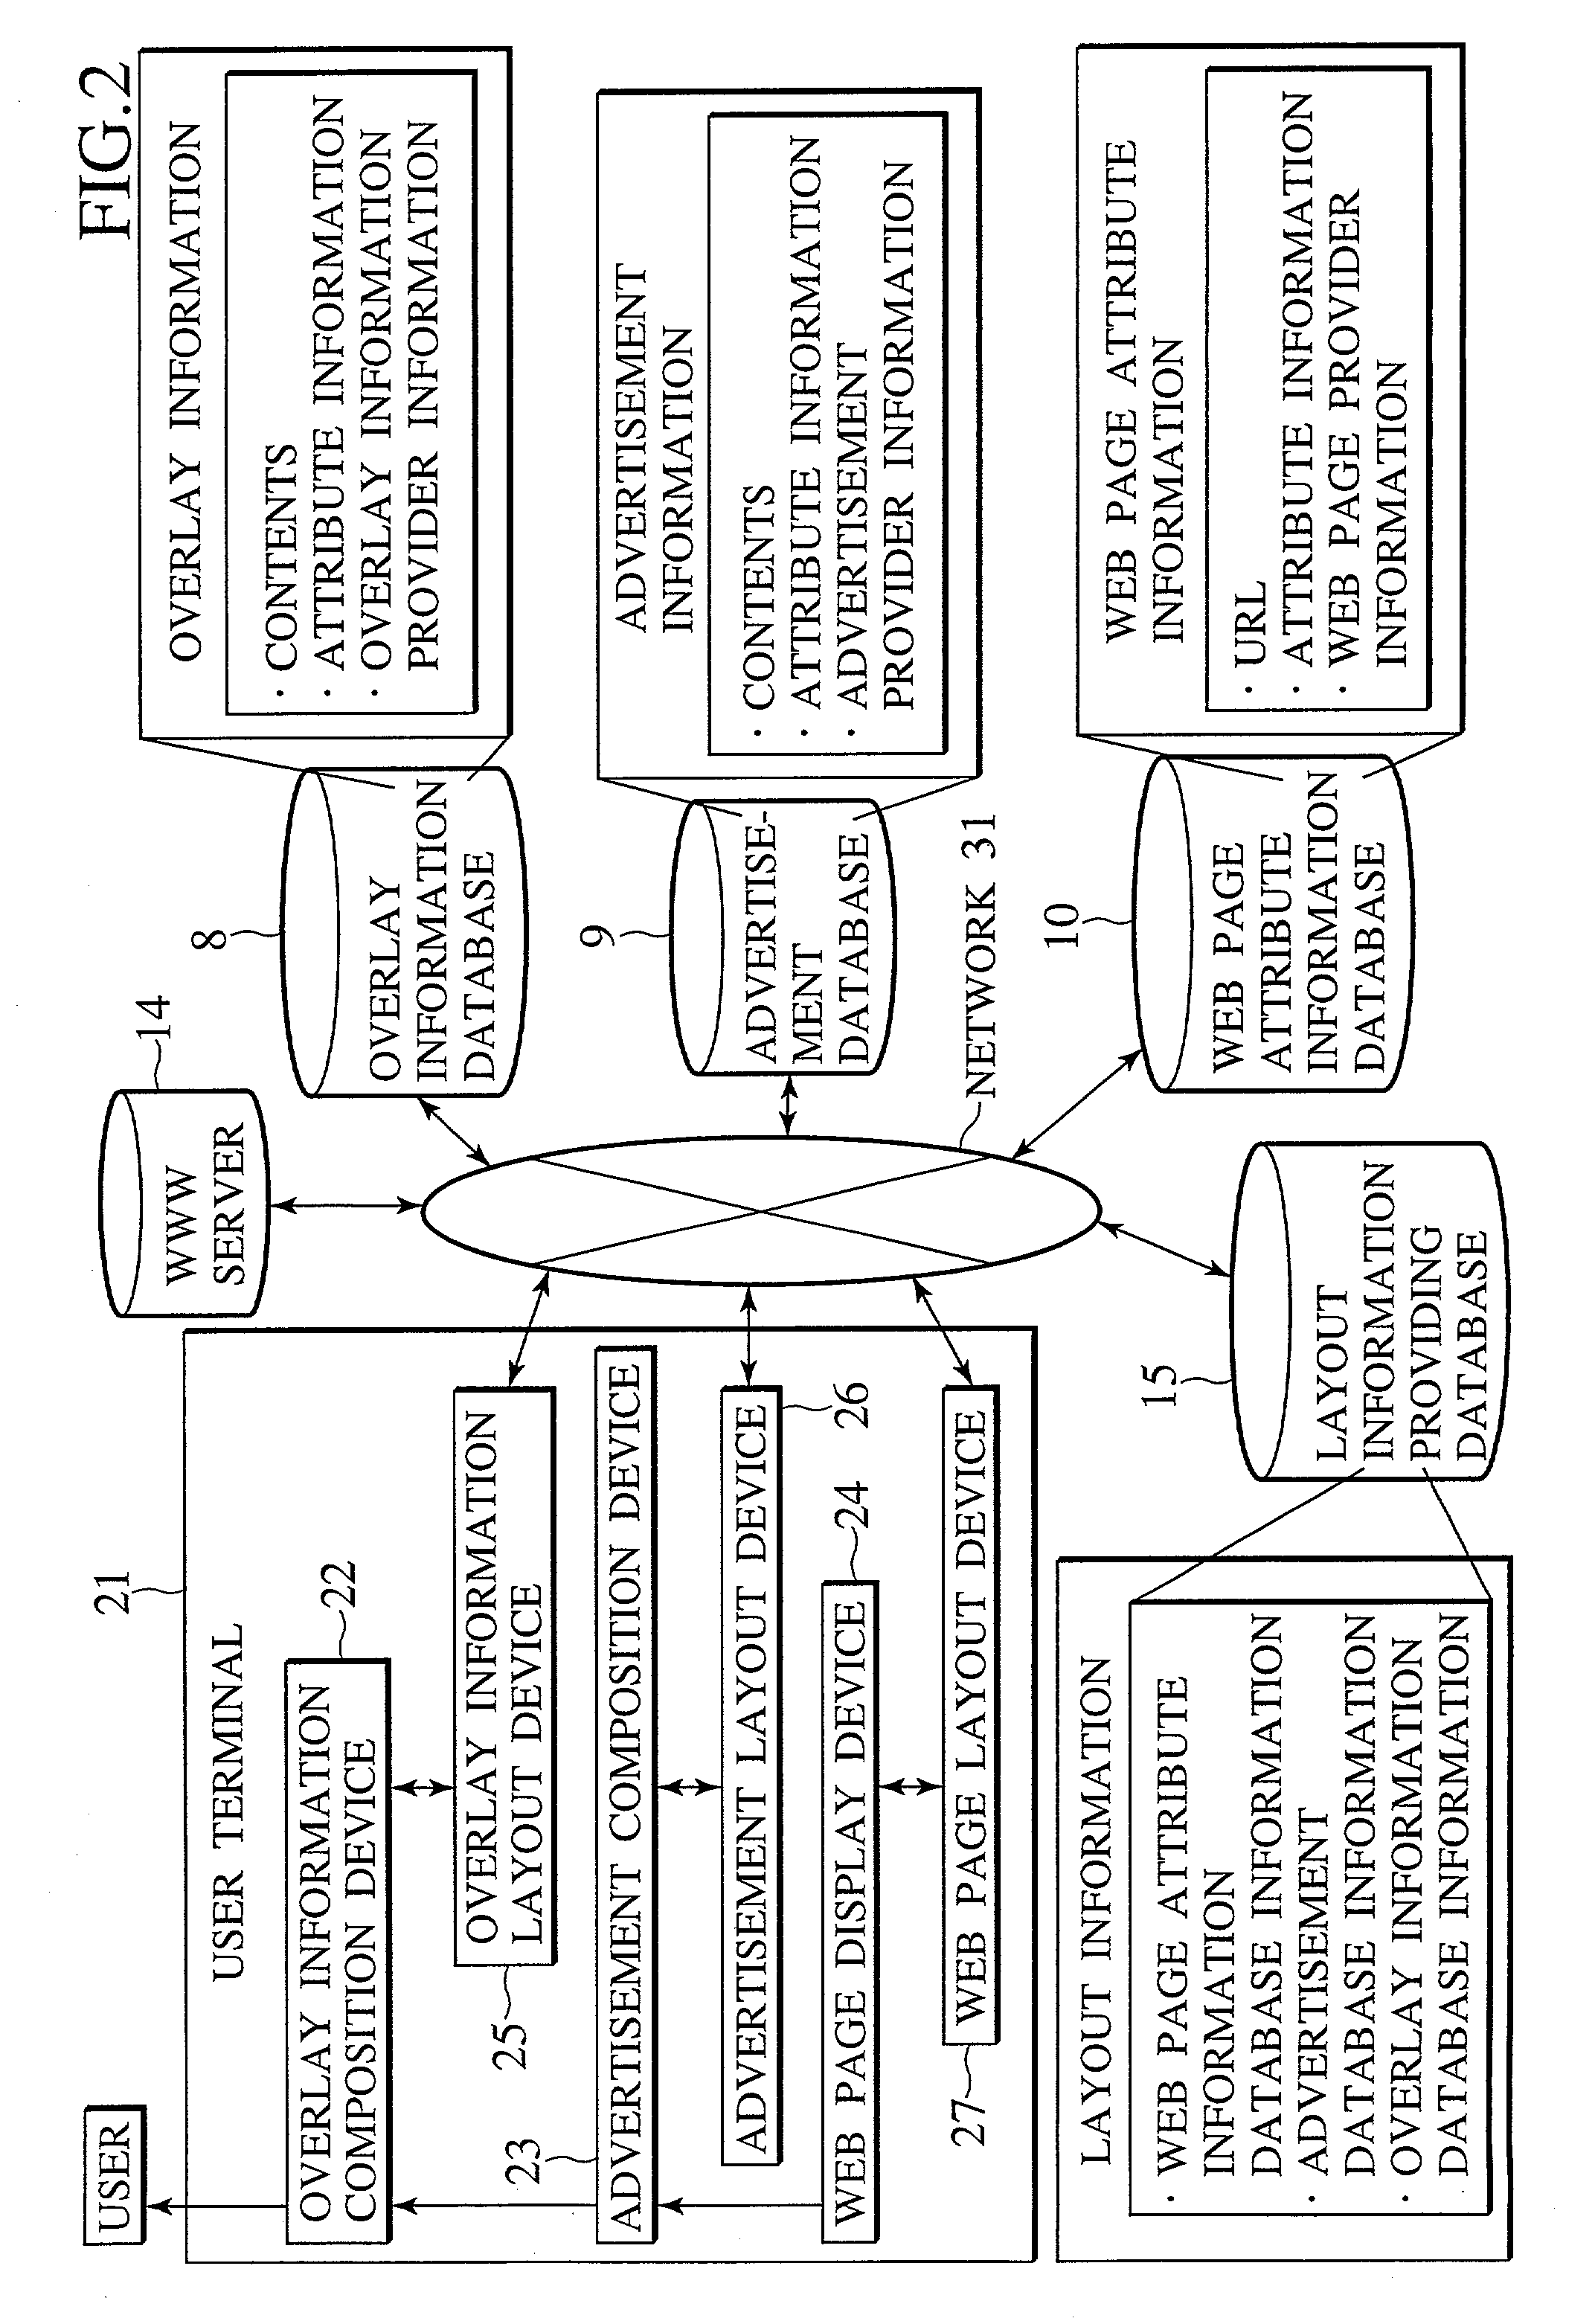 Scheme for posting advertisements on comprehensive information viewing device